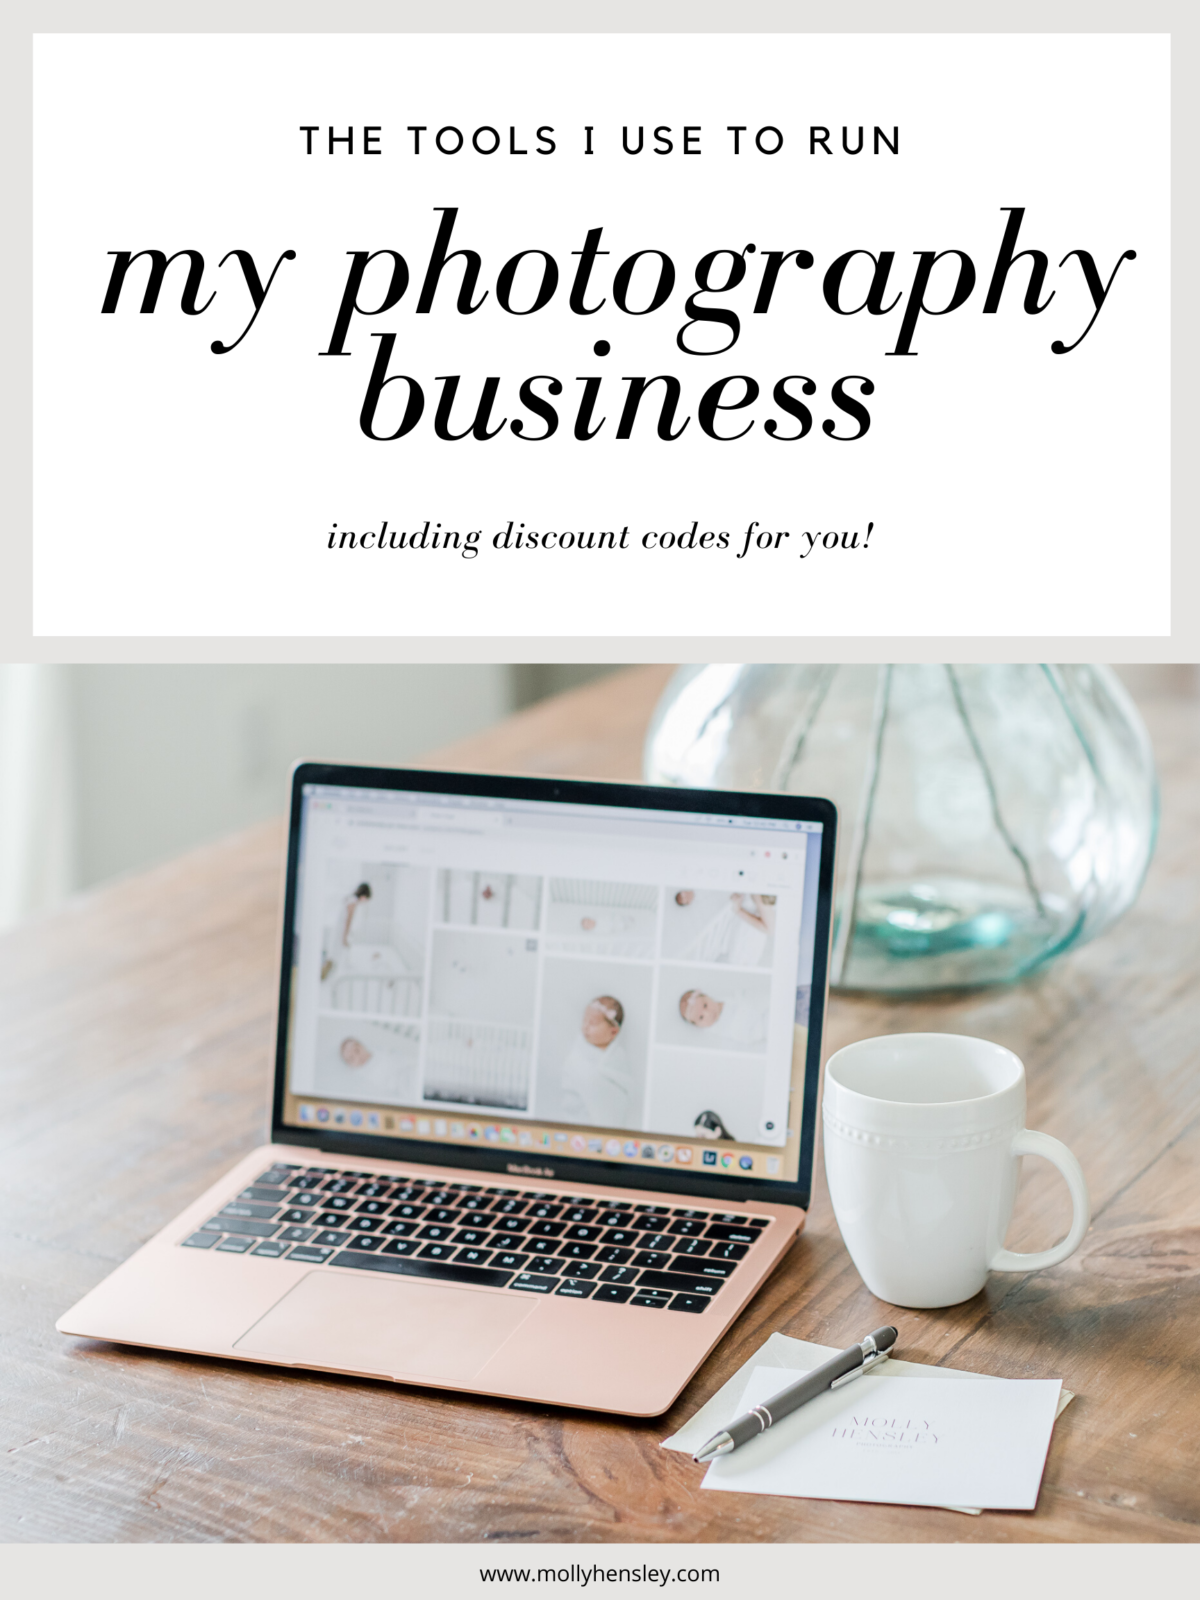 The tools I use to run my photography business